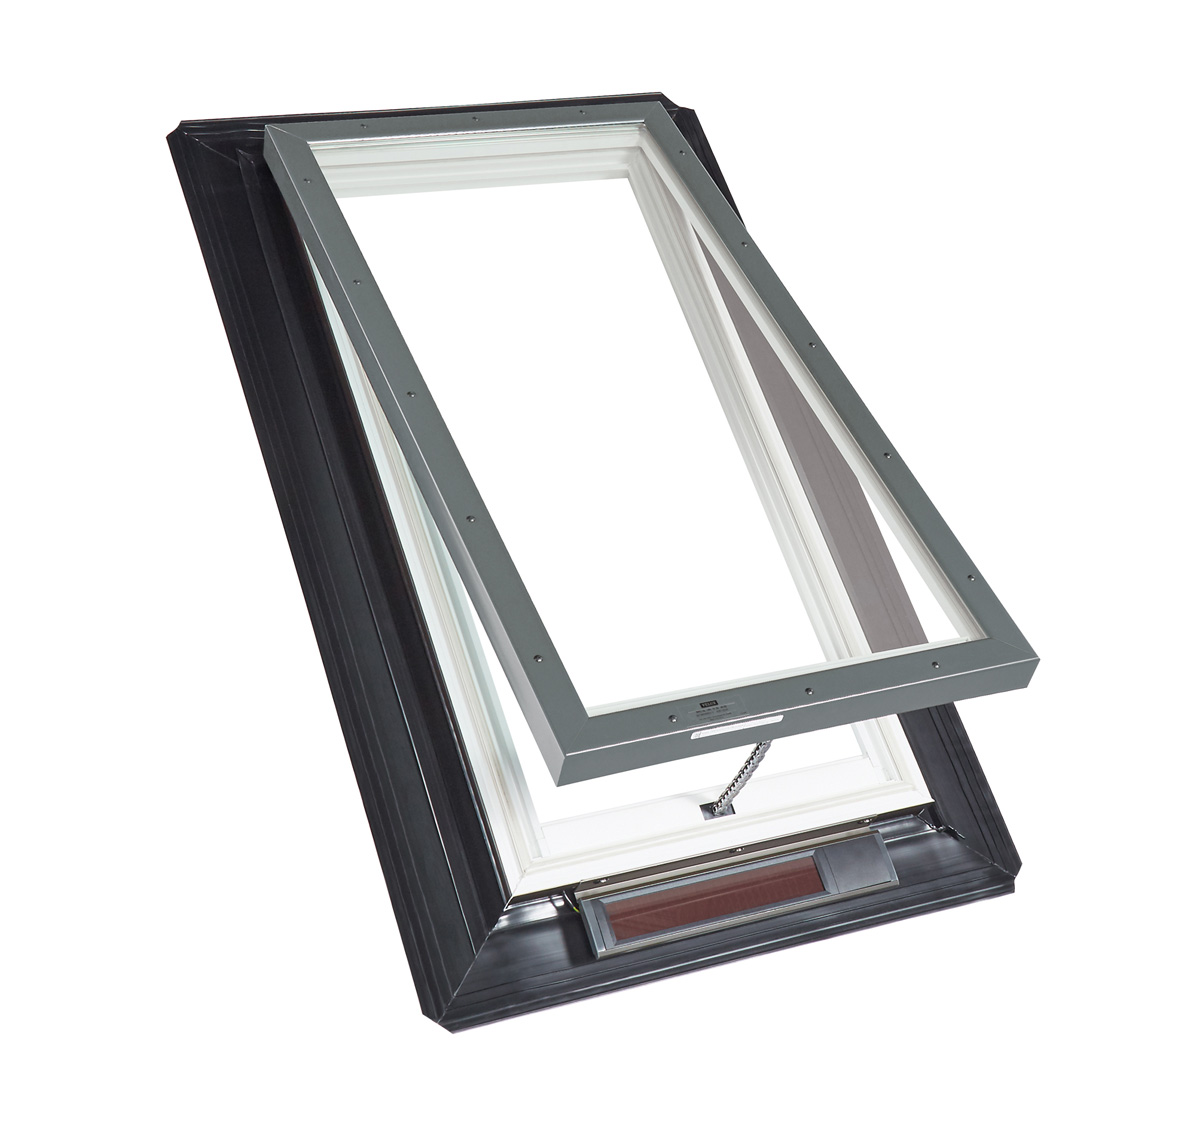 VELUX 30.06-in x 37.88-in Fixed Deck Mount Skylight with Laminated Low-e  Argon in the Skylights department at Lowes.com